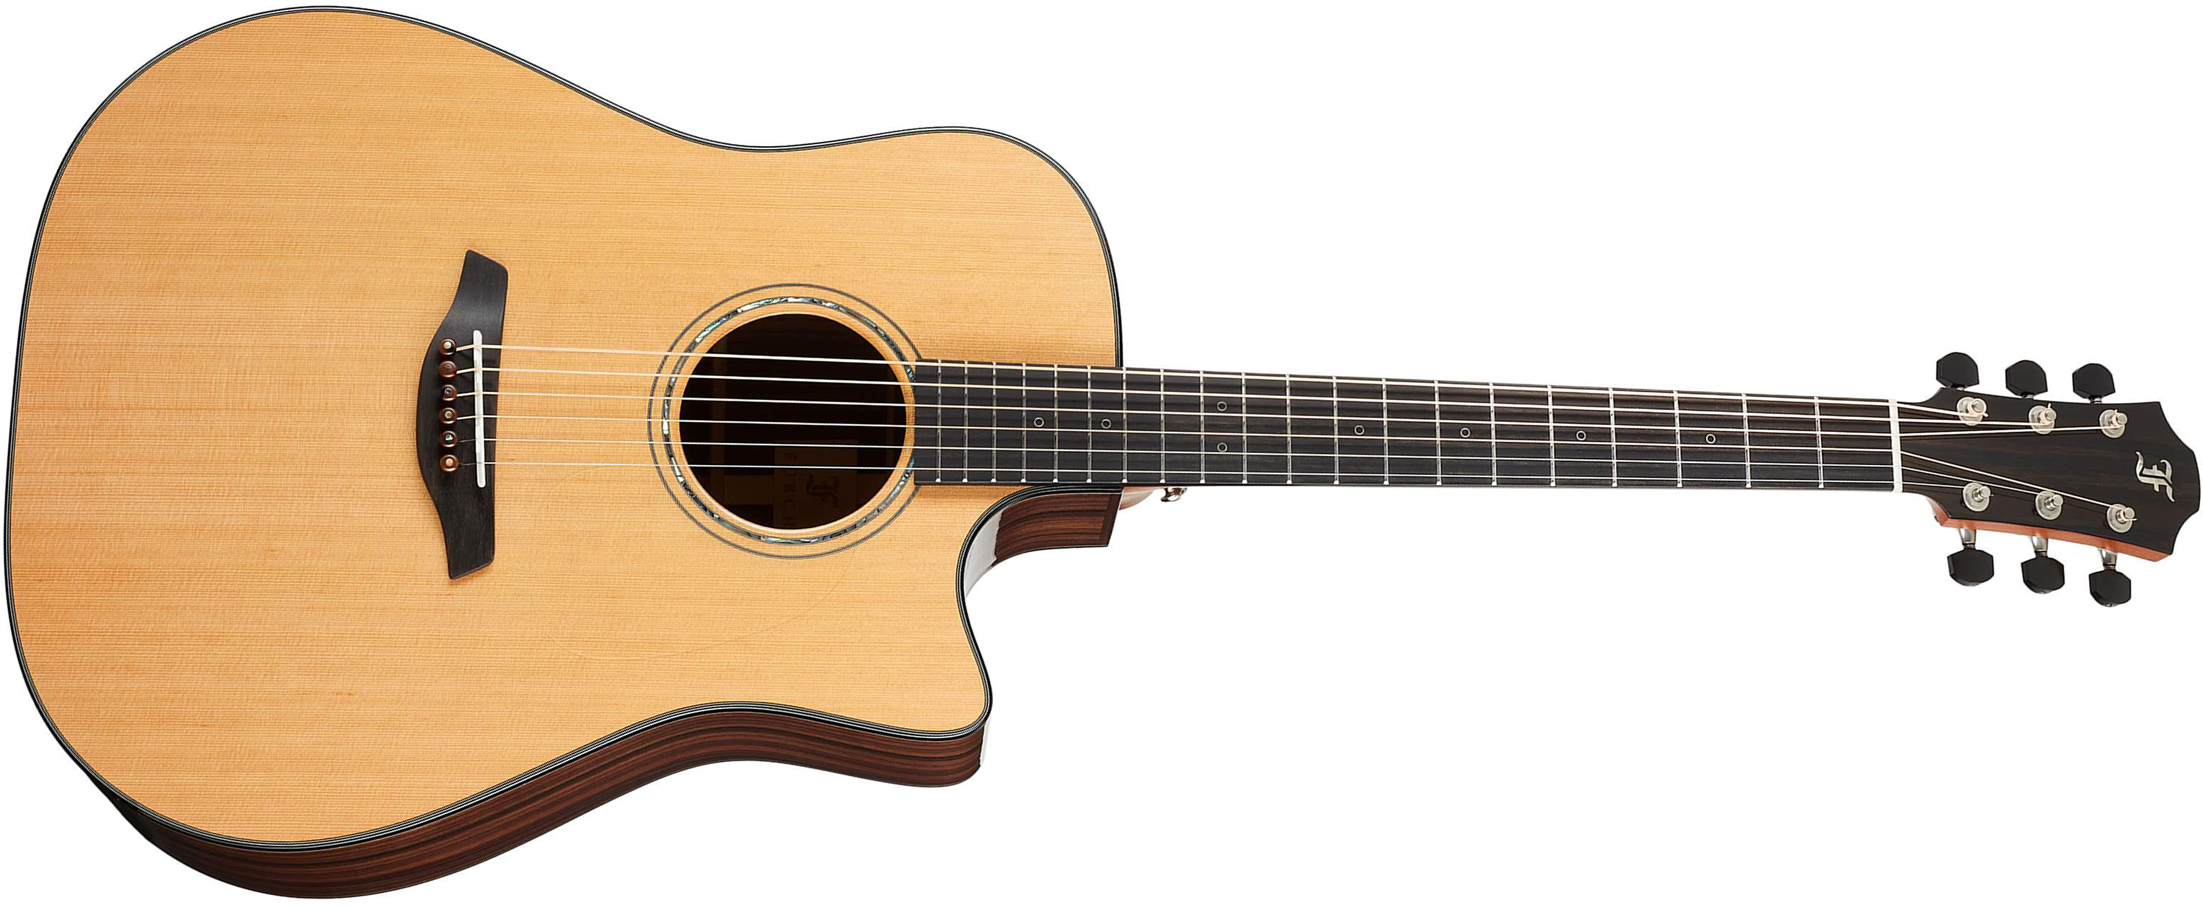 Furch Dc-cr Lrb1 Yellow Dreadnought Cw Cedre Palissandre Eb - Natural Full-pore - Electro acoustic guitar - Main picture